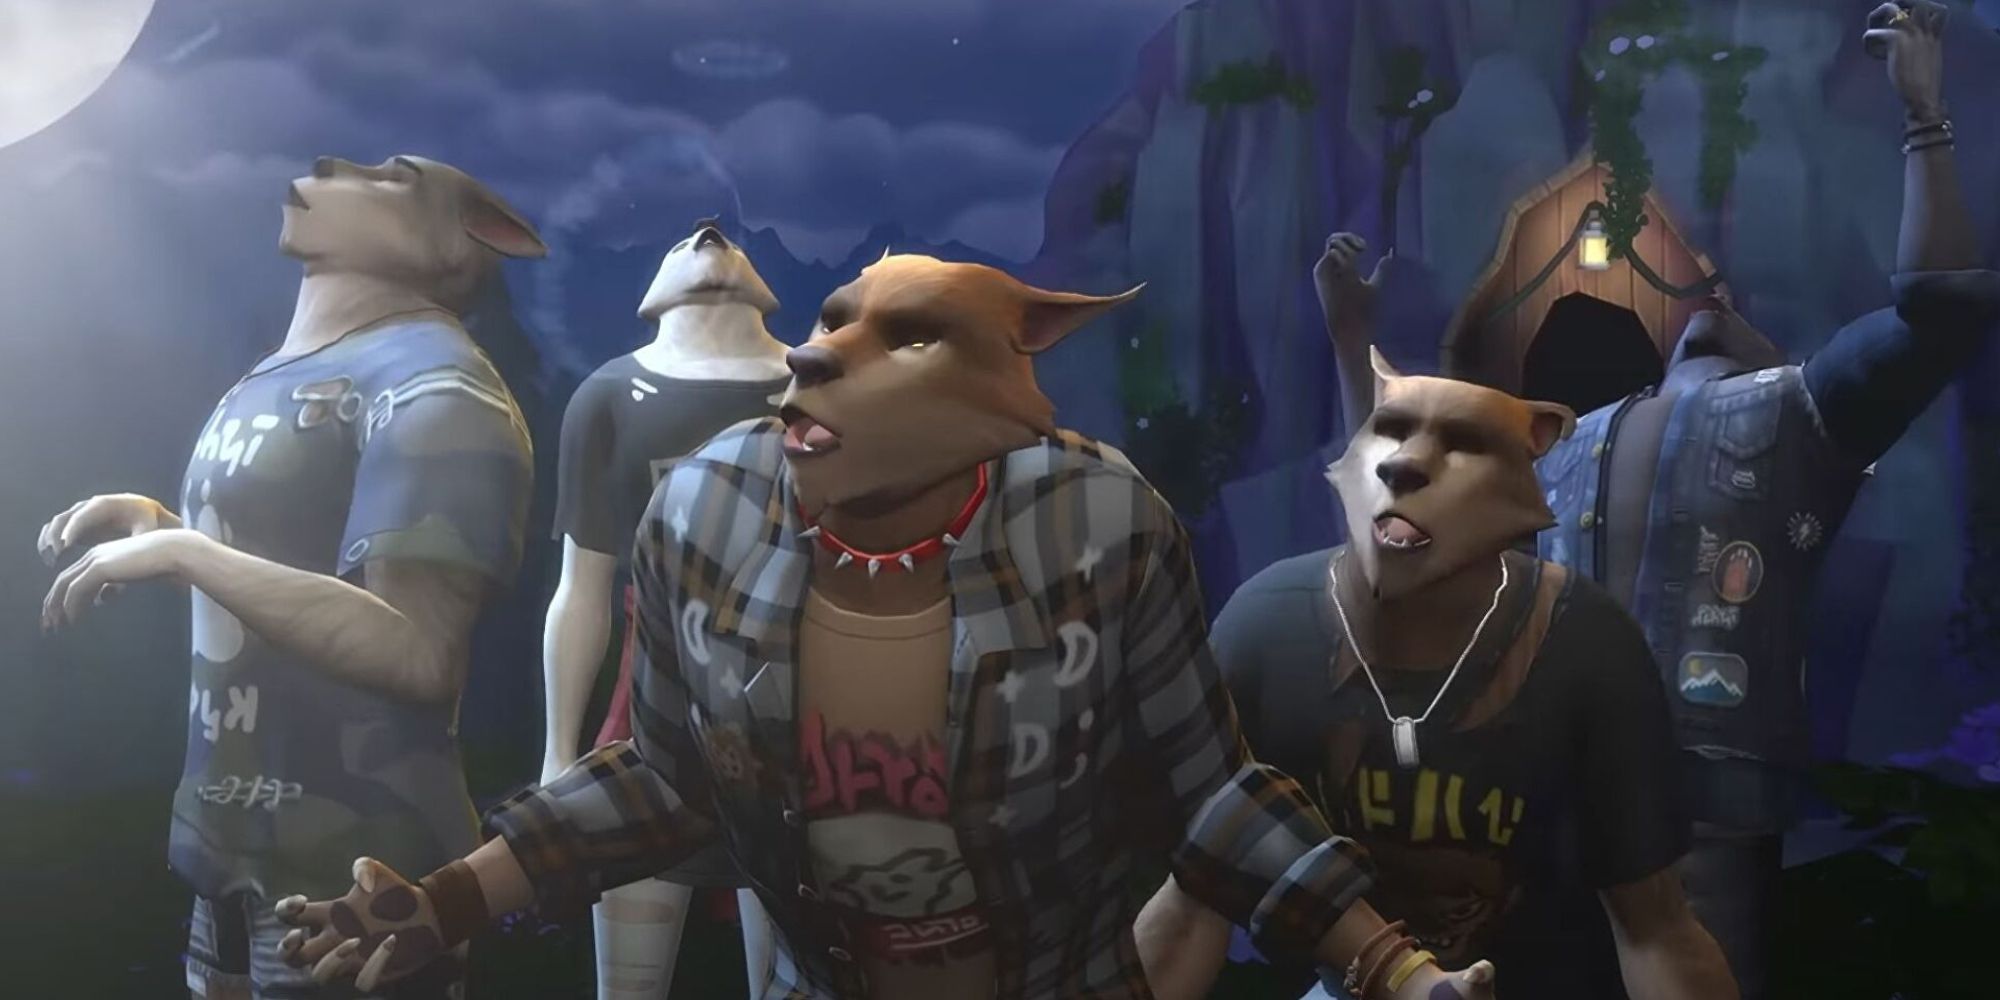 Howling Werewolves in Sims 4 